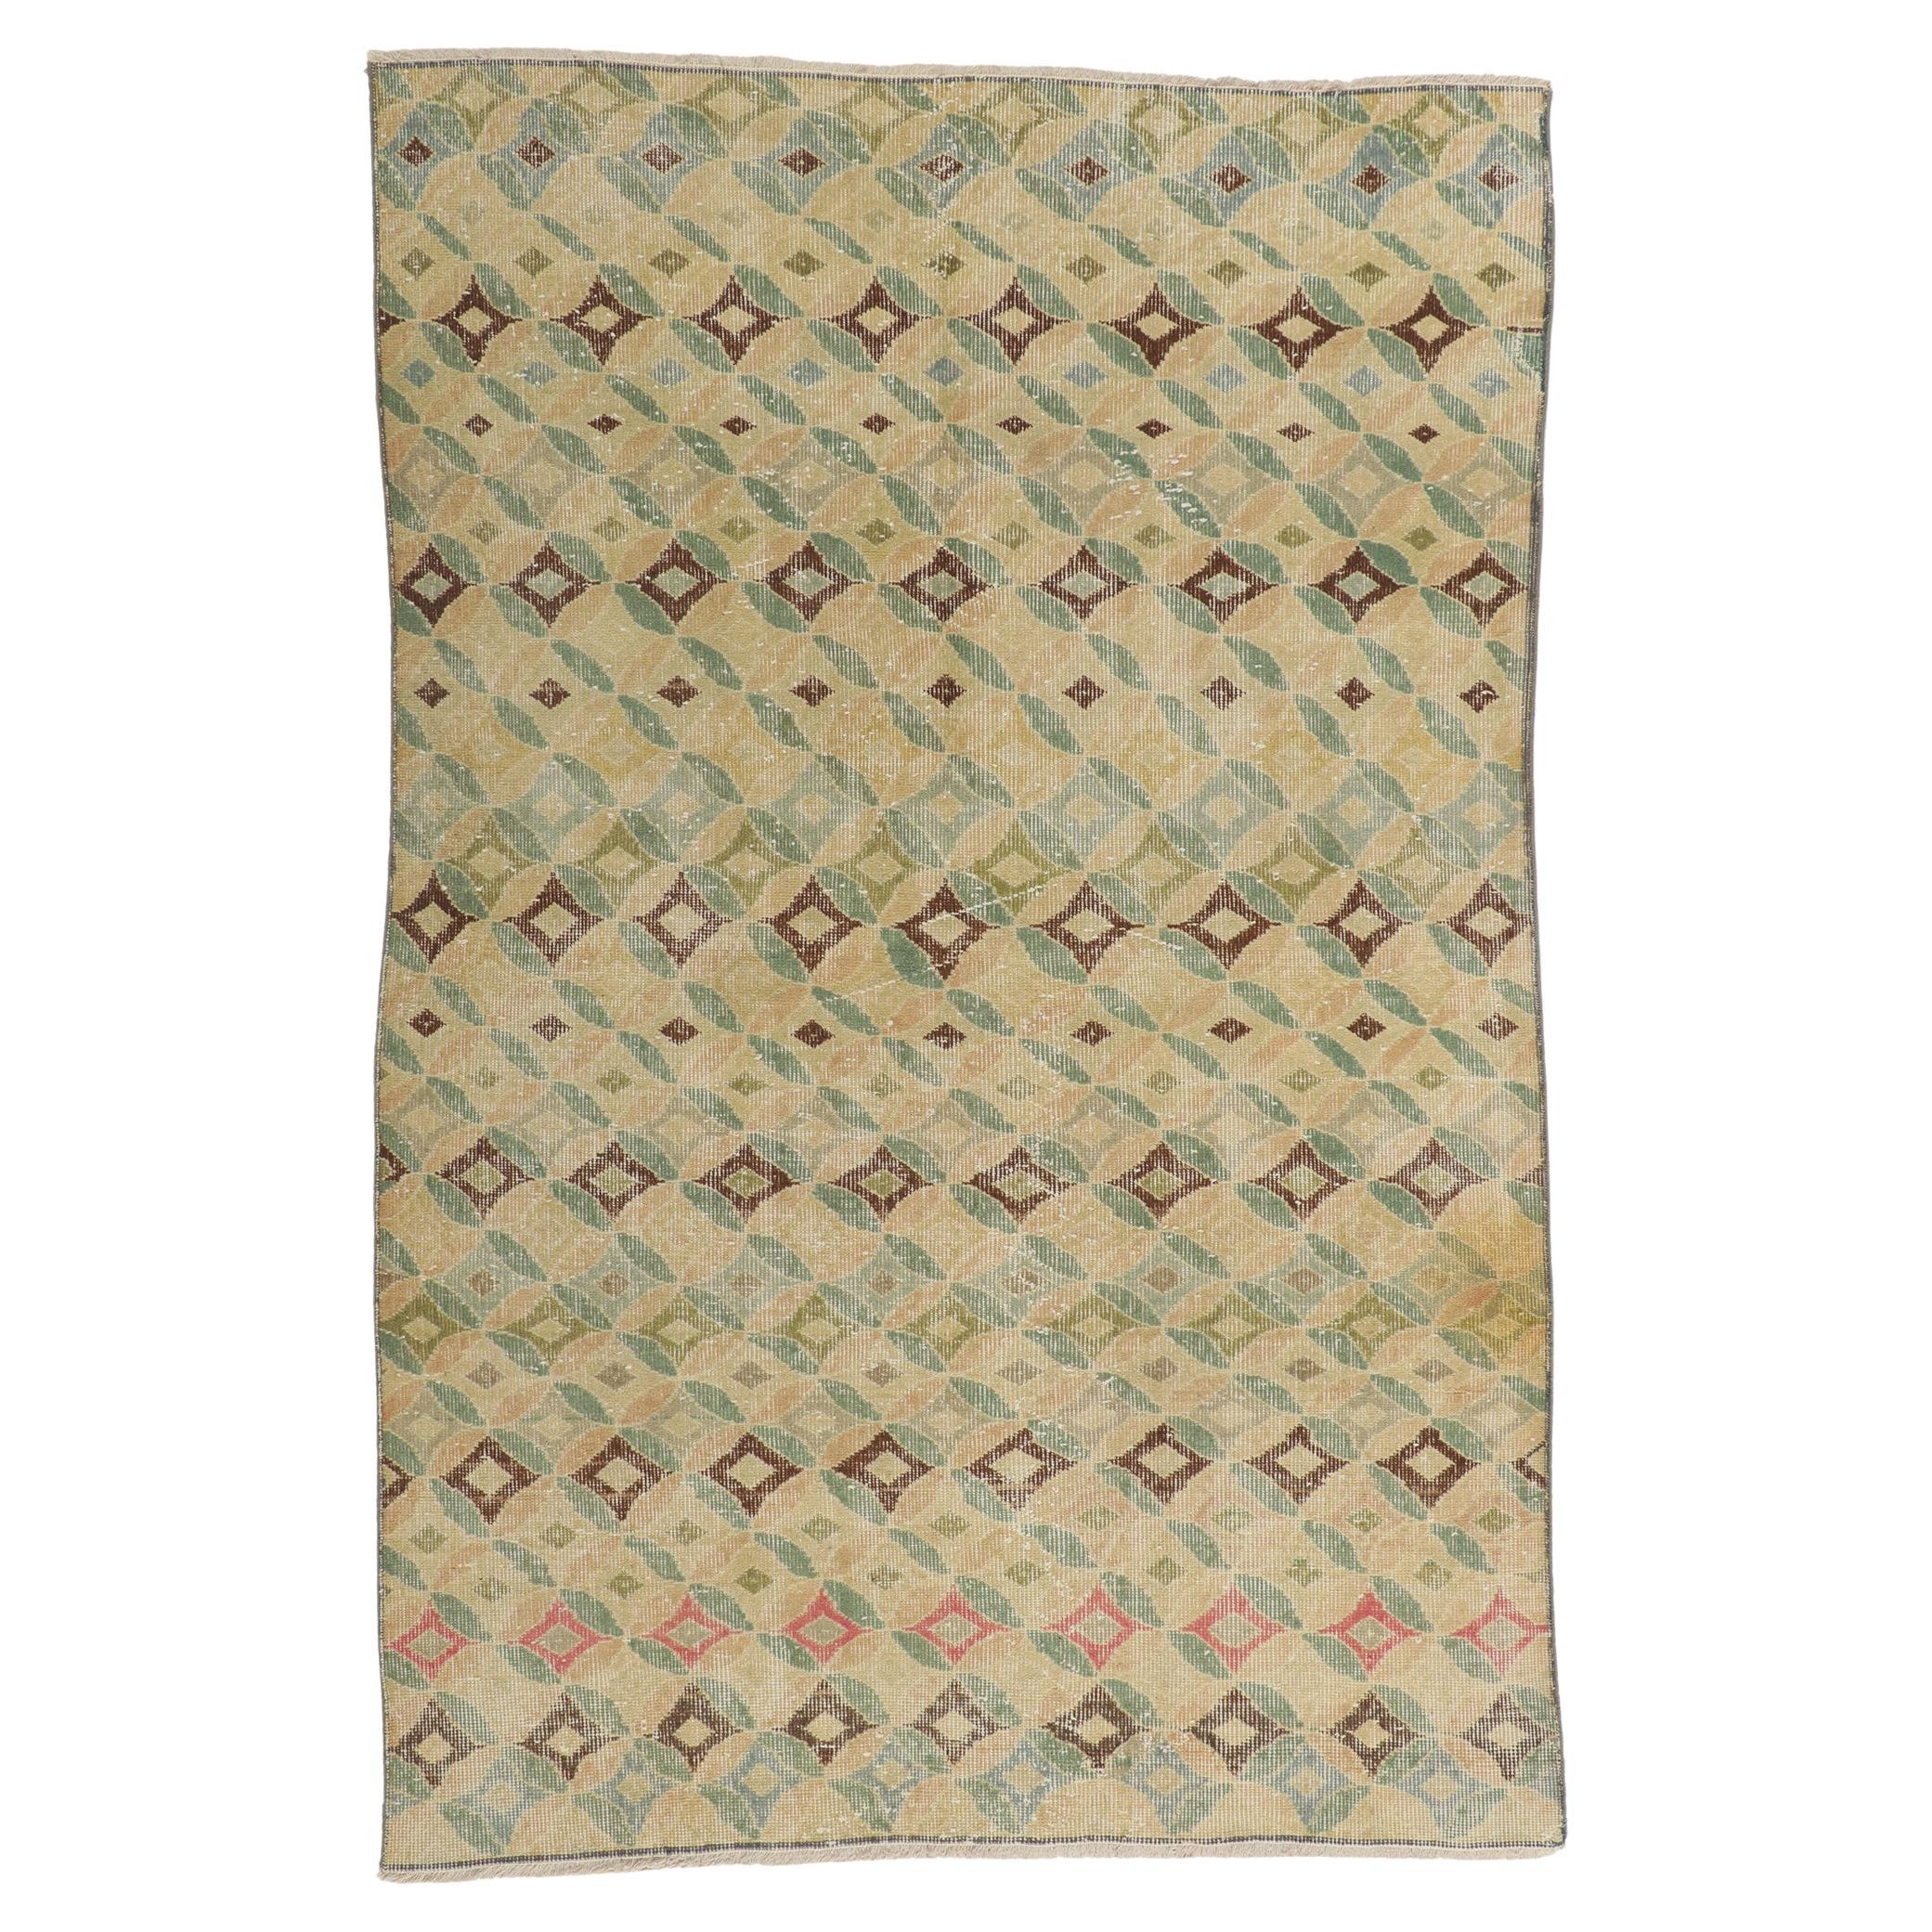 Rustic Vintage Distressed Turkish Sivas Rug with Faded Earth-Tone Colors For Sale